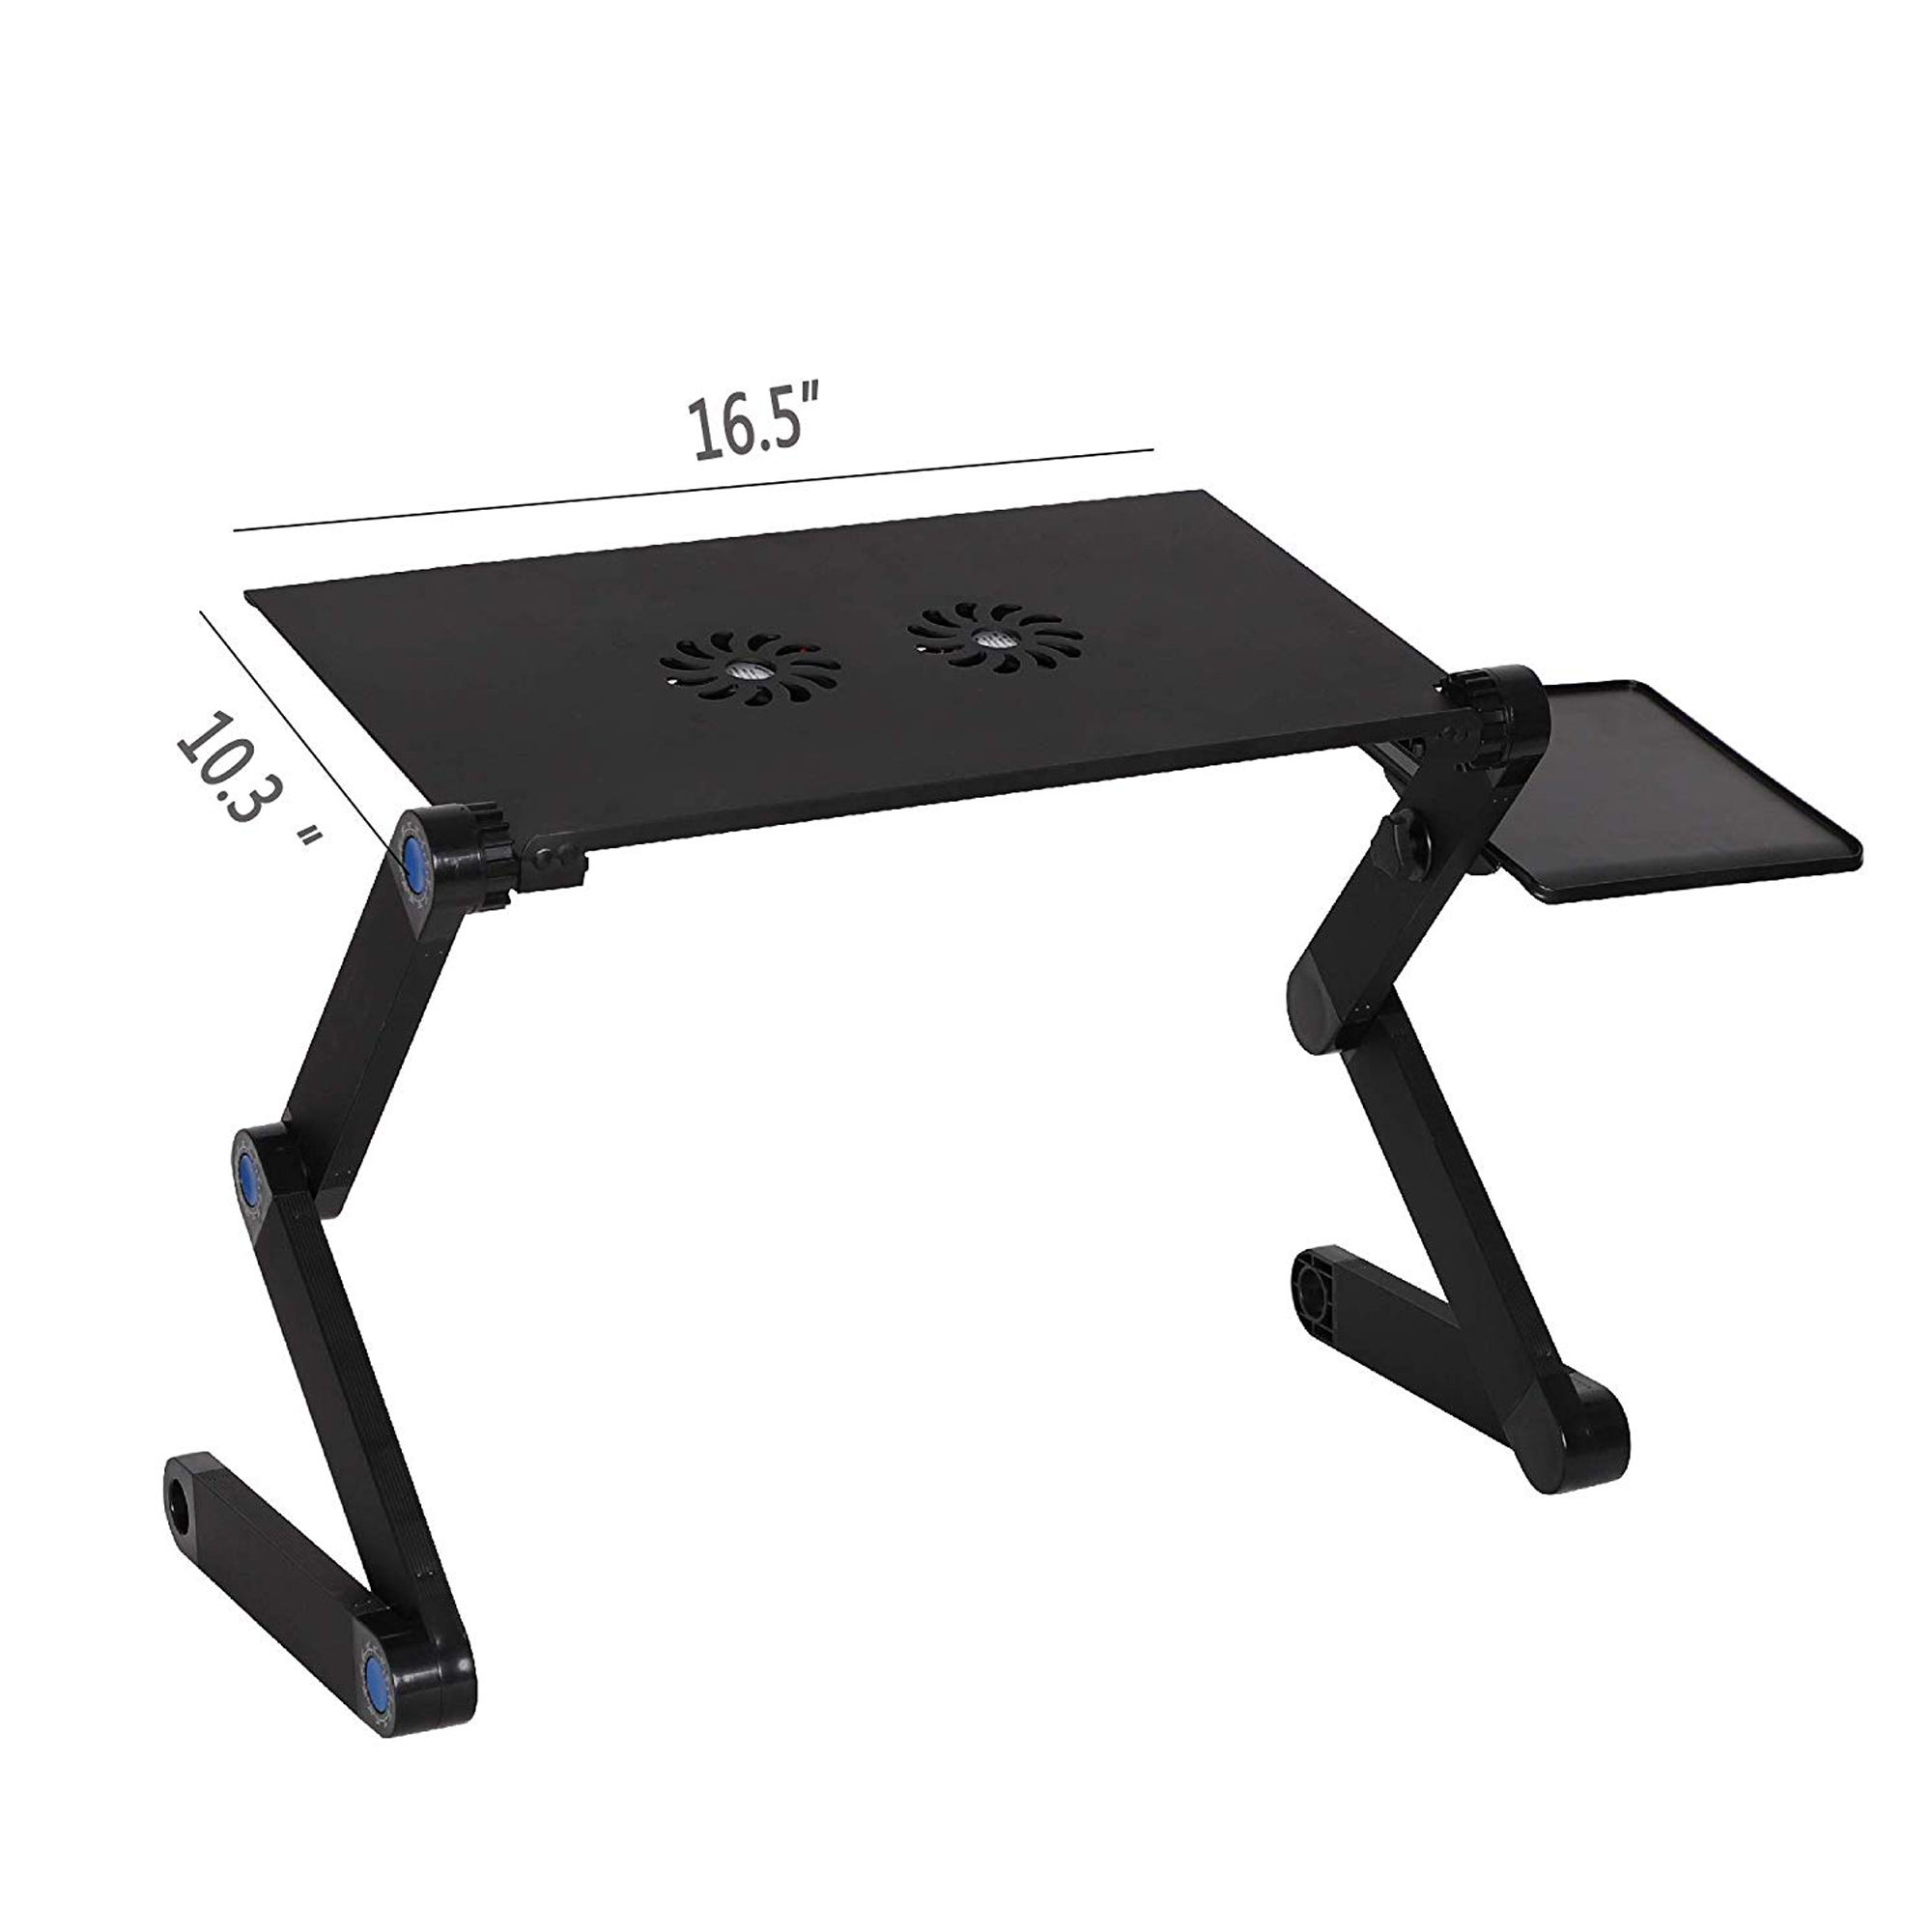 KARMAS PRODUCT Foldable Aluminum Laptop Desk Adjustable Portable Laptop Table Stand with 2 CPU Cooling Fans and Mouse Pad Ergonomic Lap Desk for Bed and Sofa Up to 17 inches - image 5 of 5